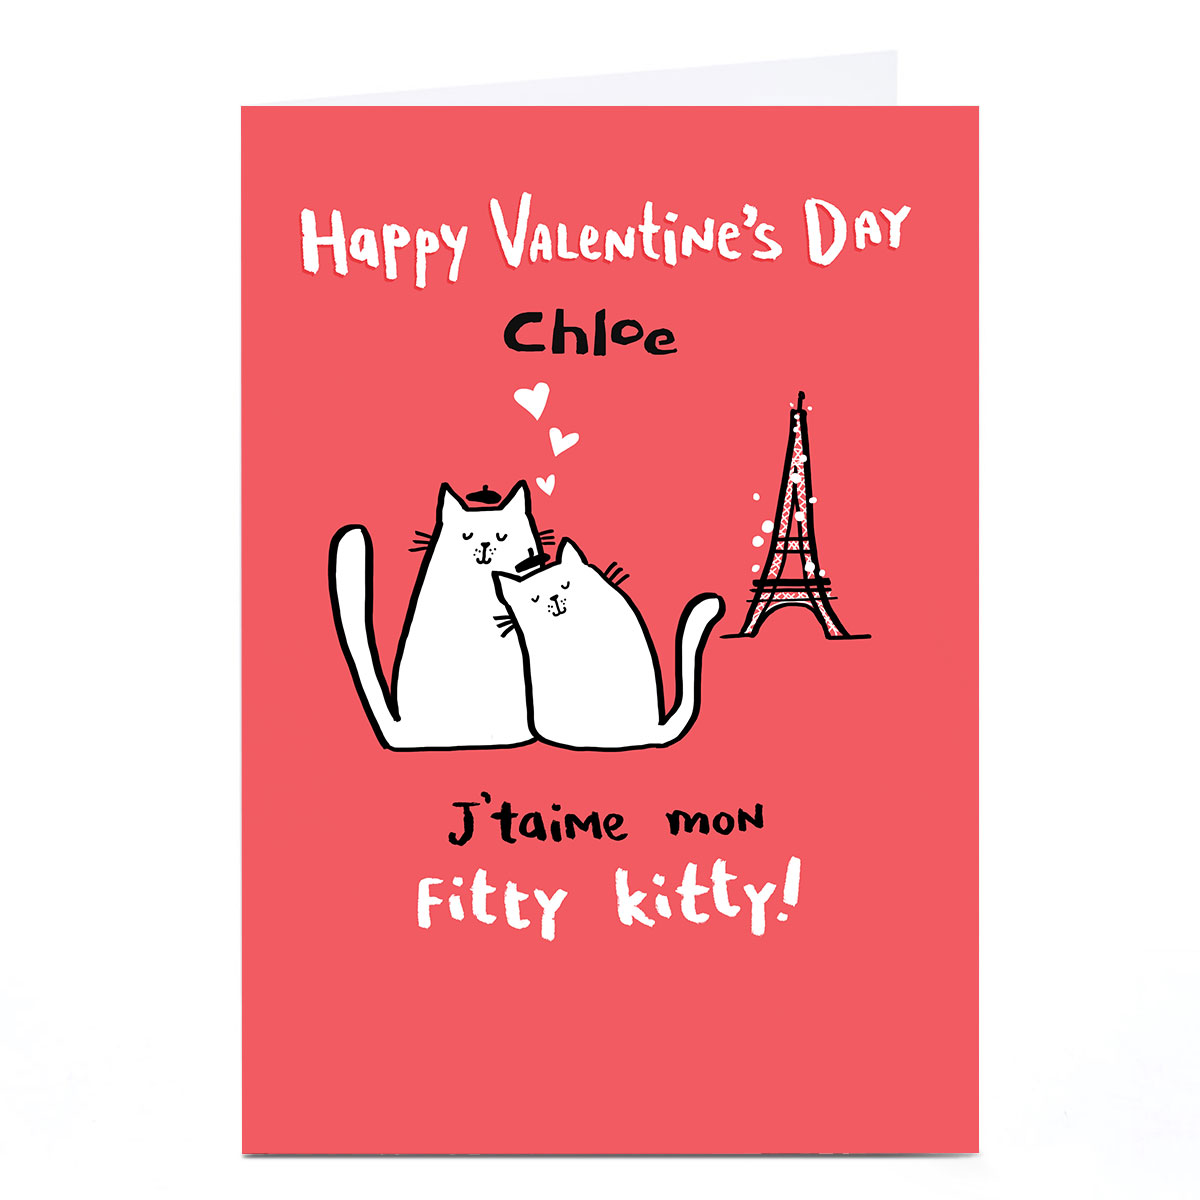 Personalised Hew Ma Valentine's Day Card - Fitty Kitty!